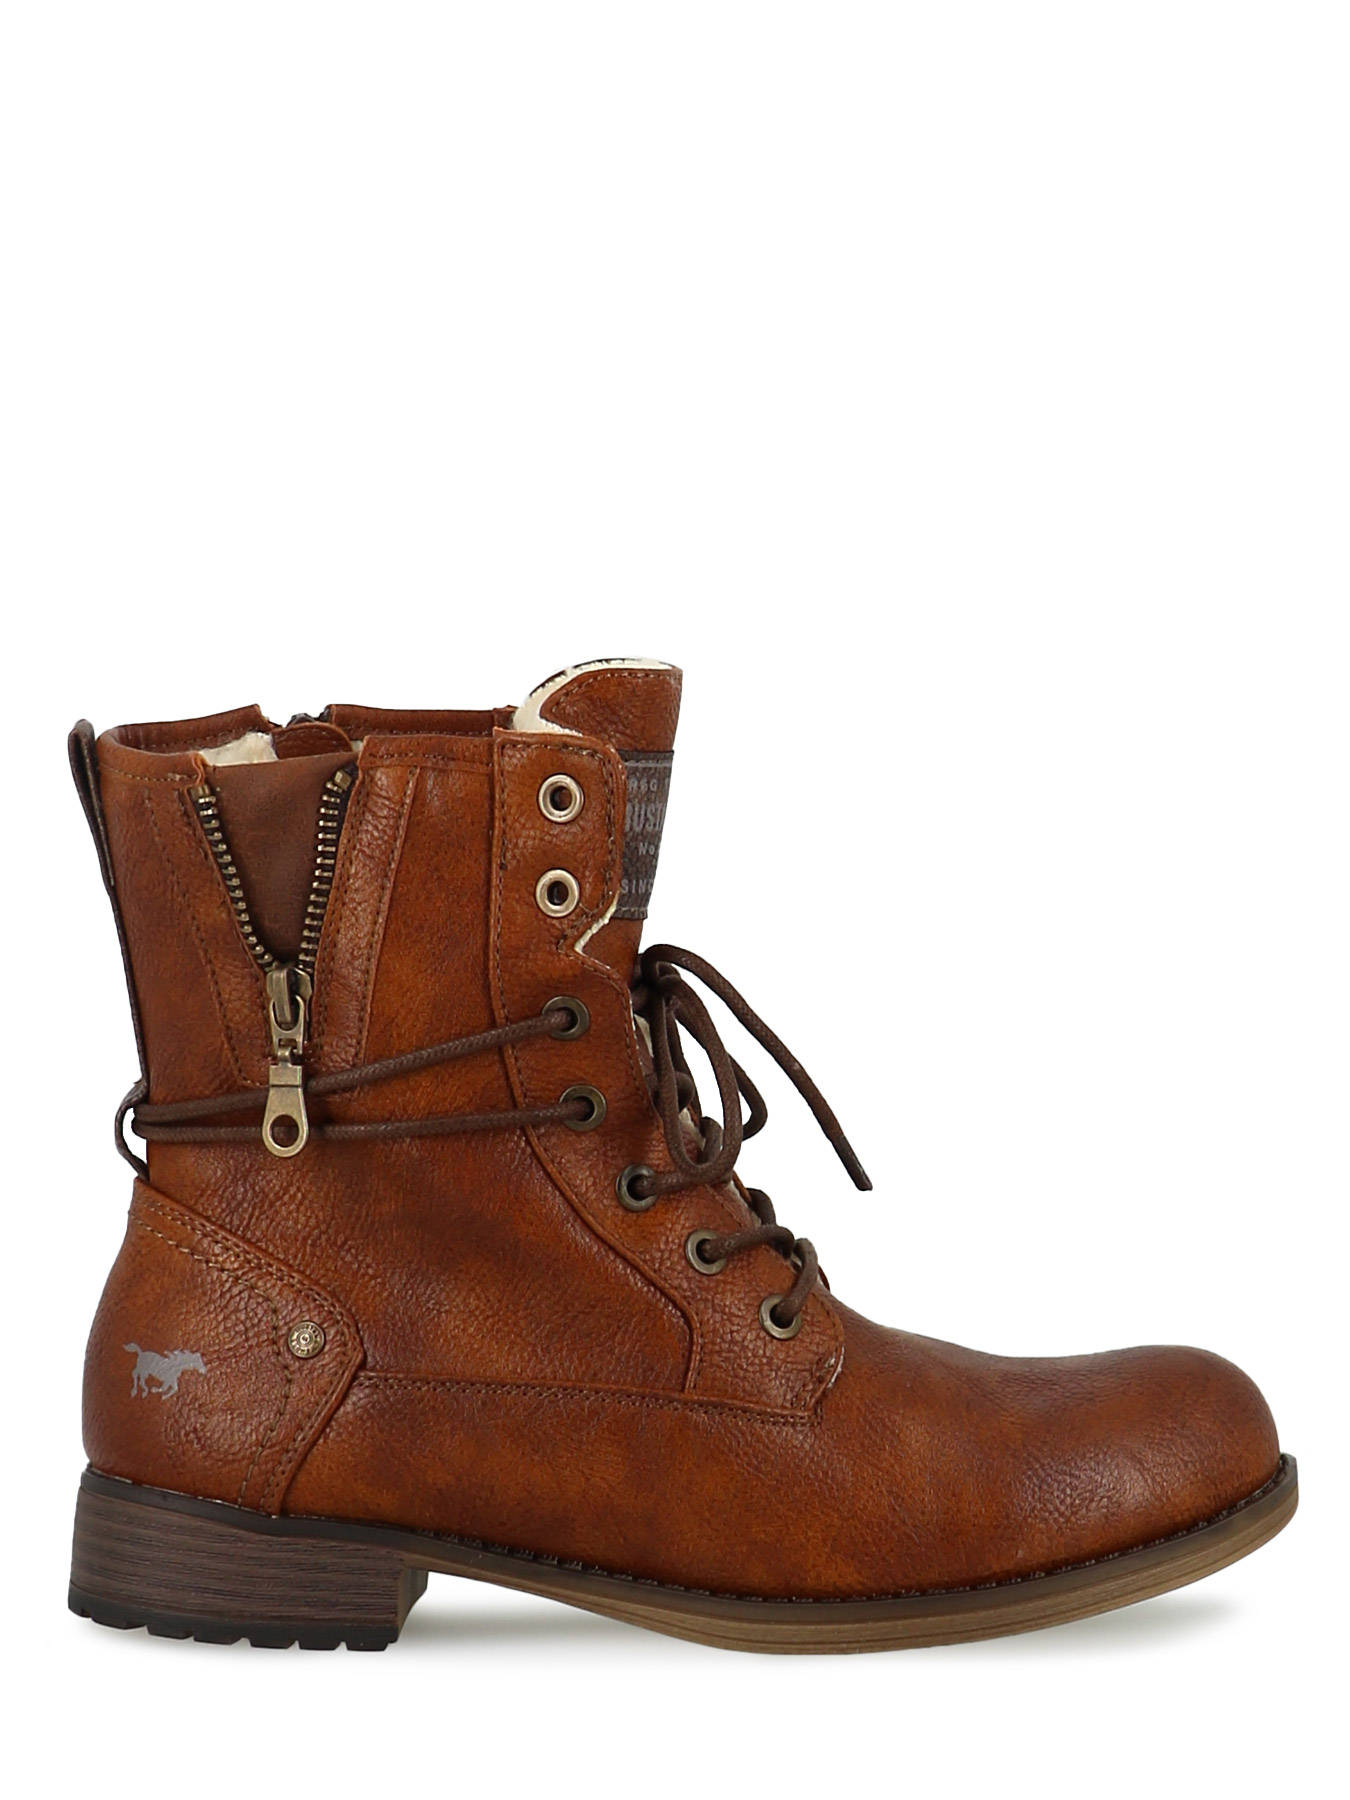 Mustang Boots 1139-630 - best prices